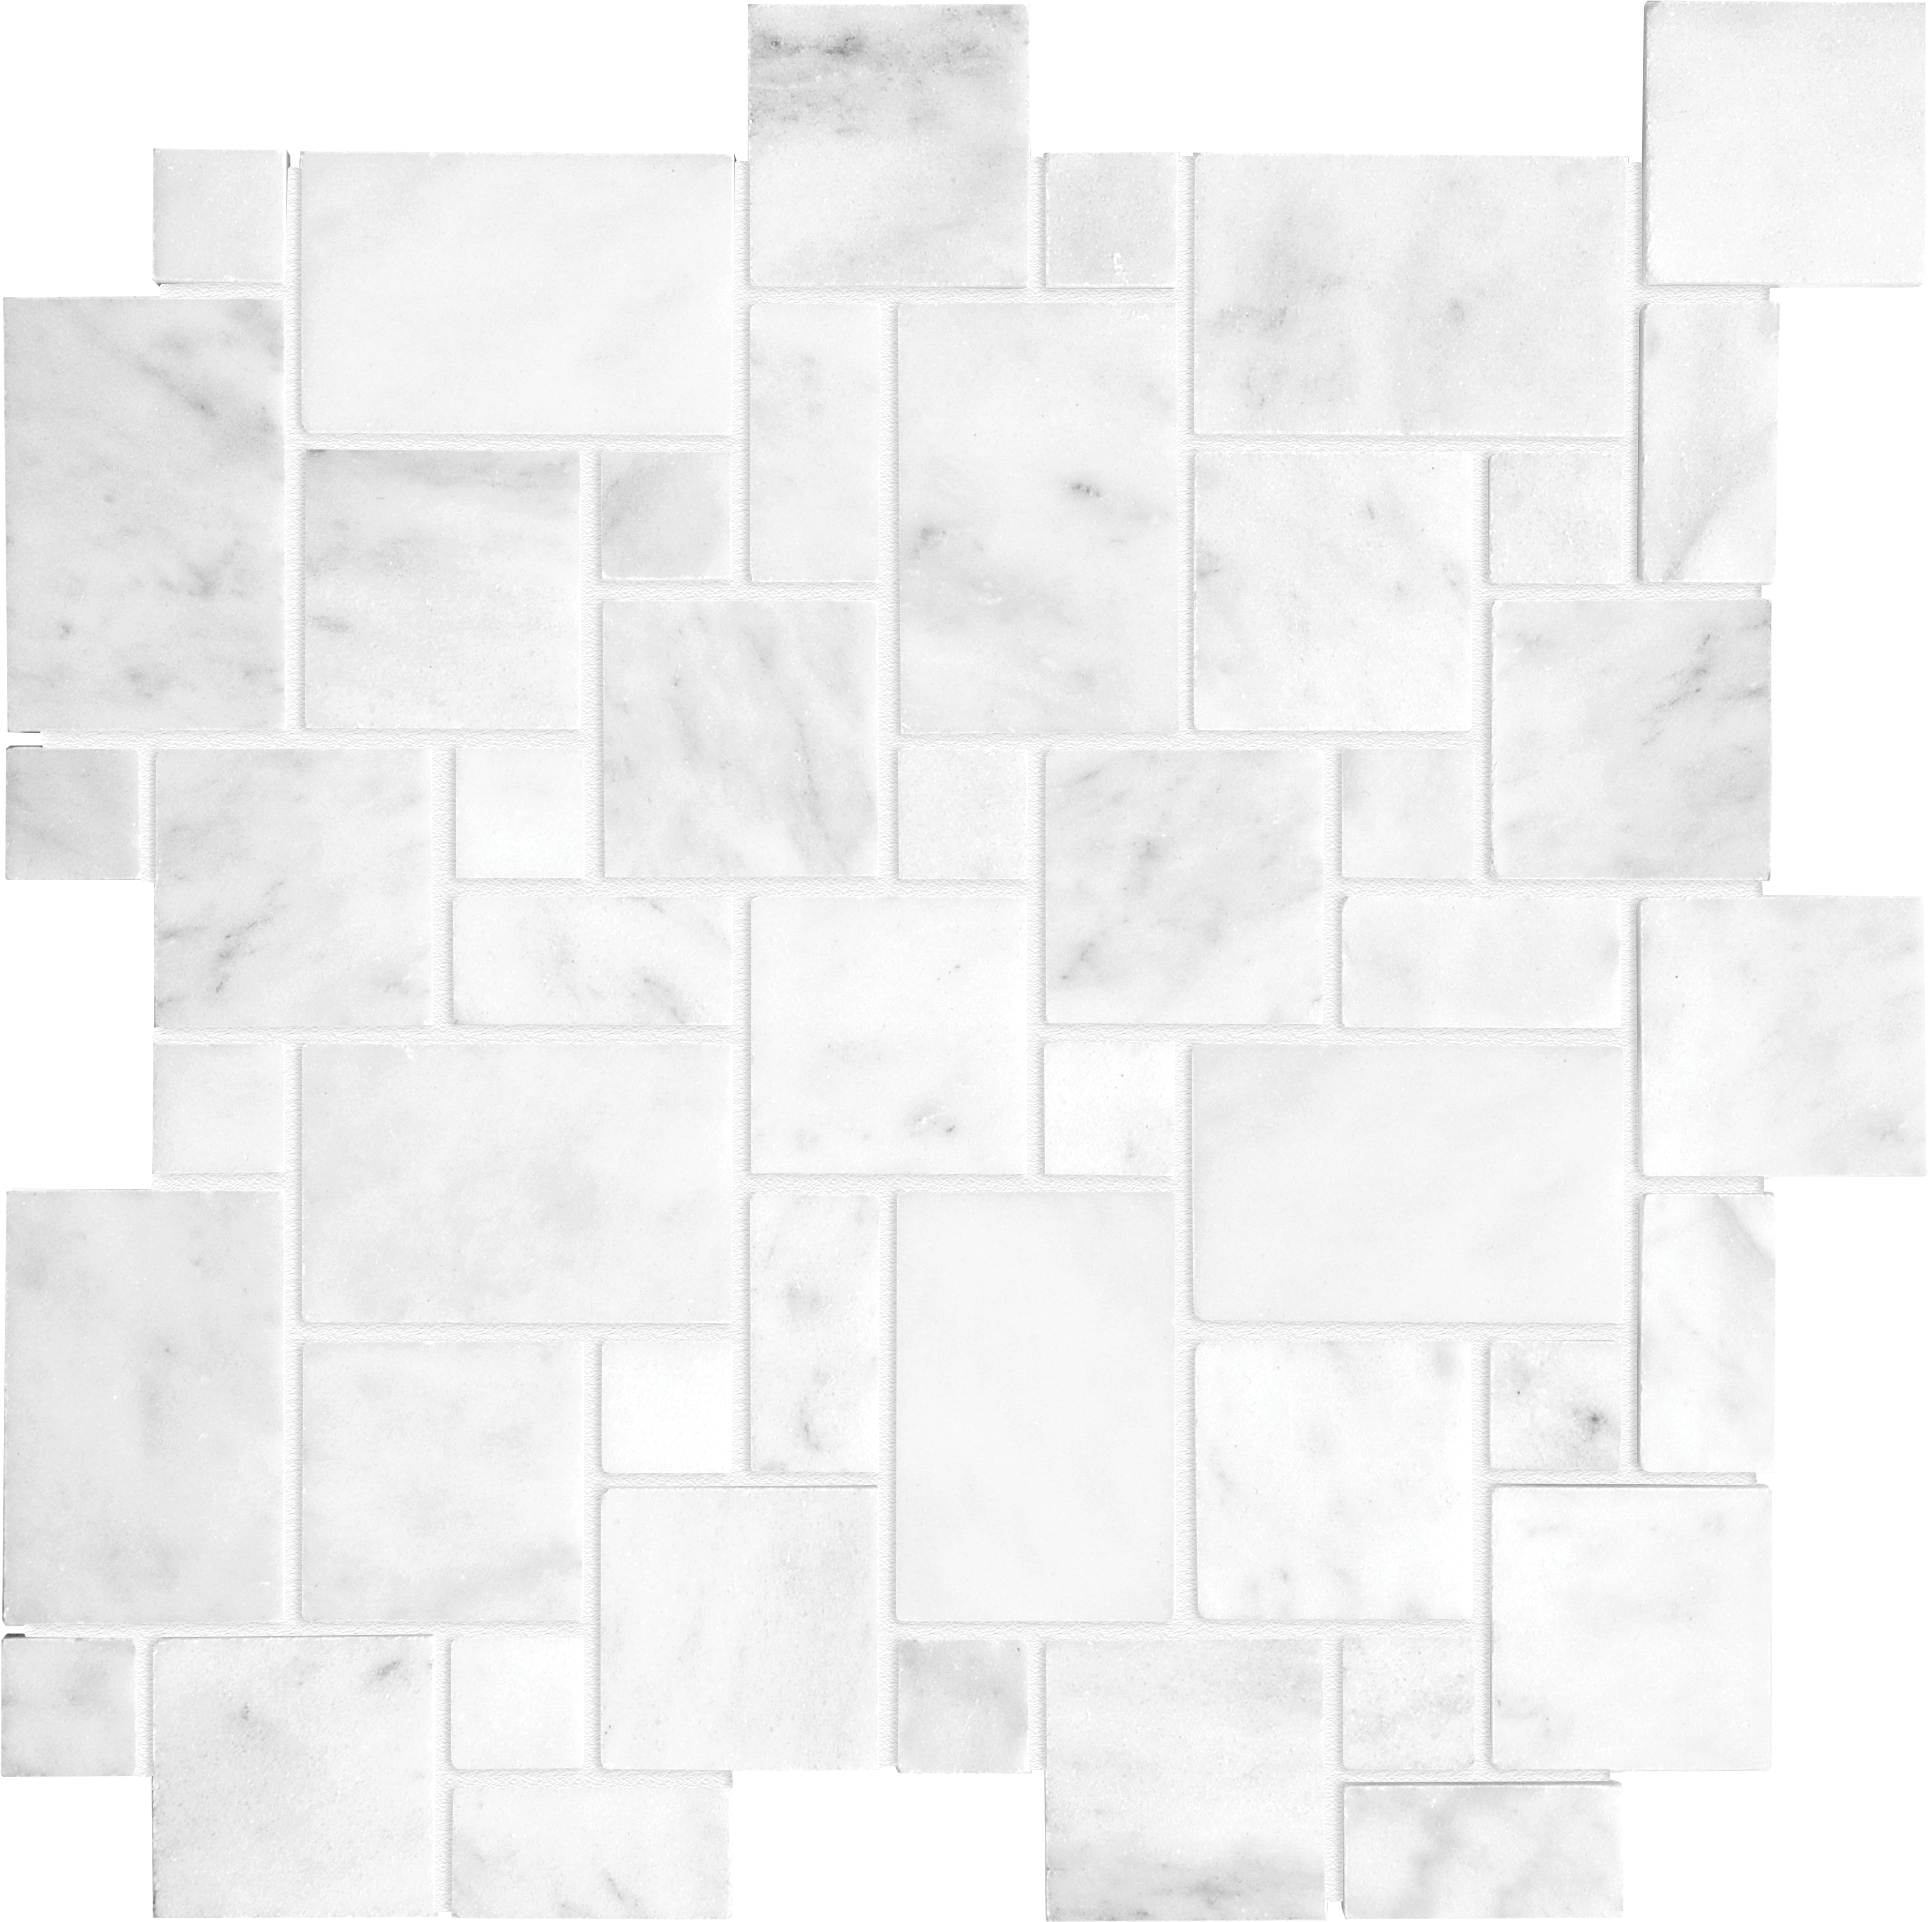 marble mini versailles pattern natural stone mosaic from bianco venatino anatolia collection distributed by surface group international polished finish straight edge edge mesh shape